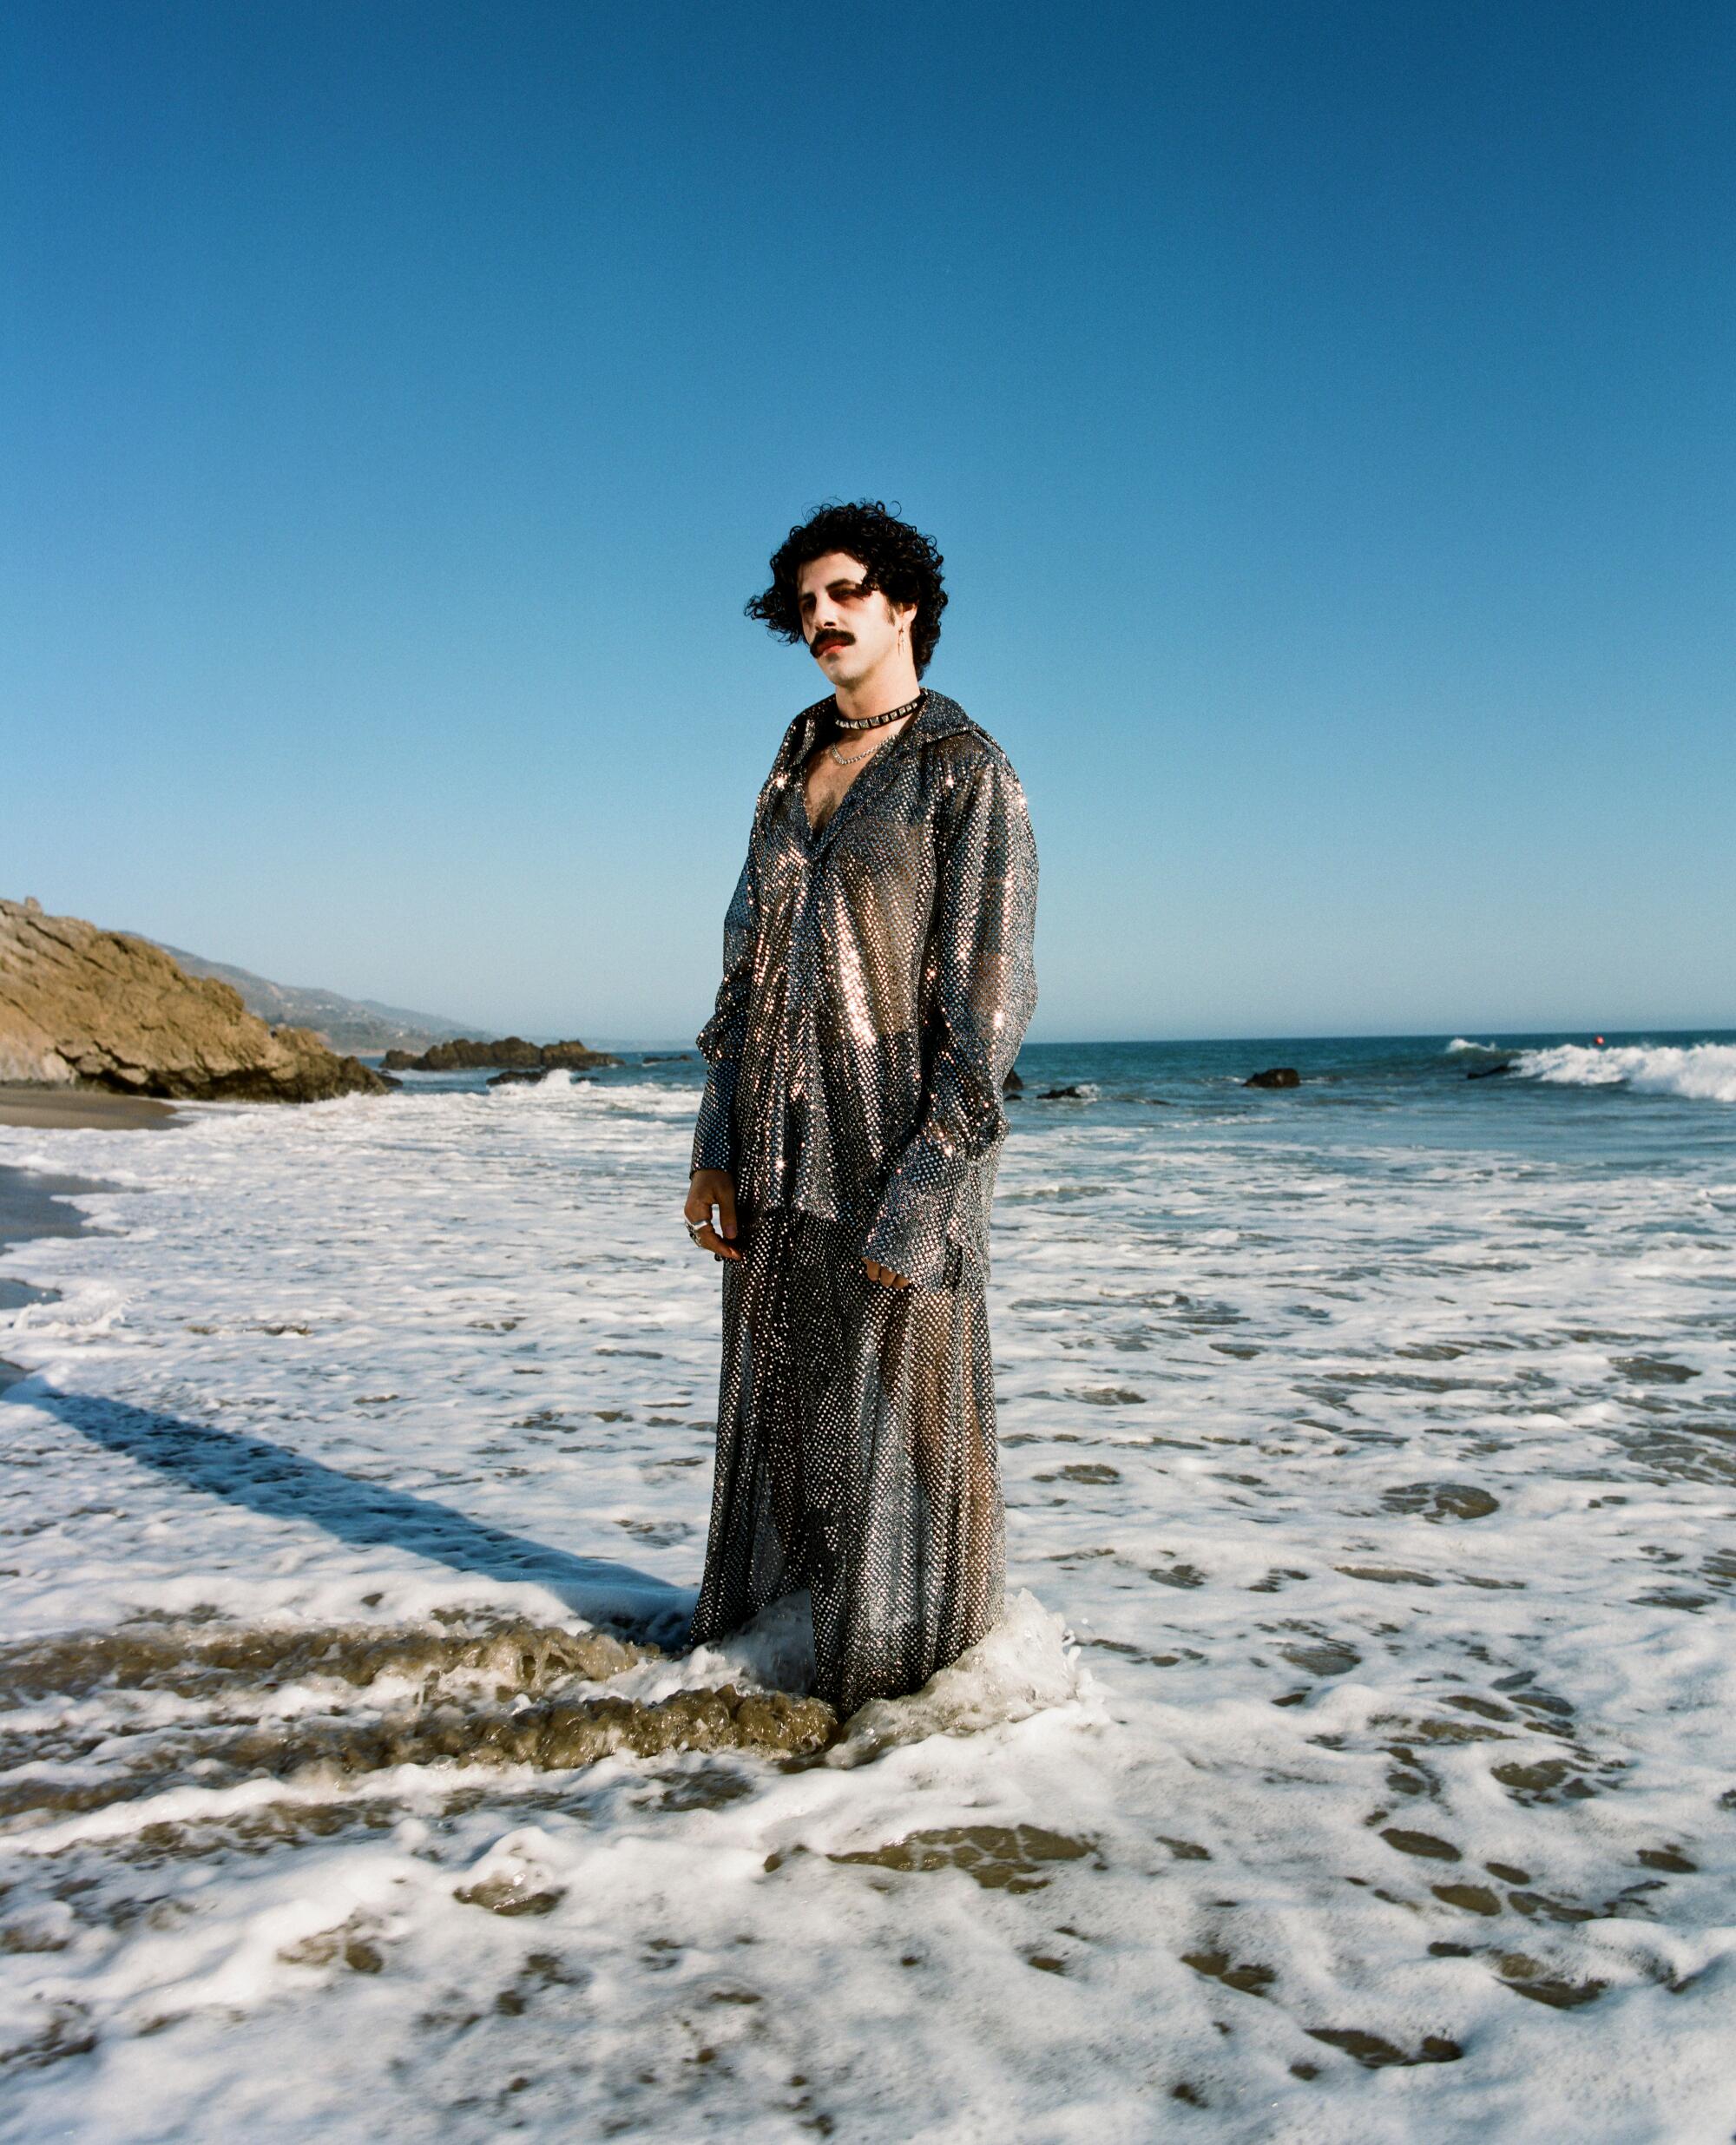 A man in a long glittery outfit stands in the ocean.